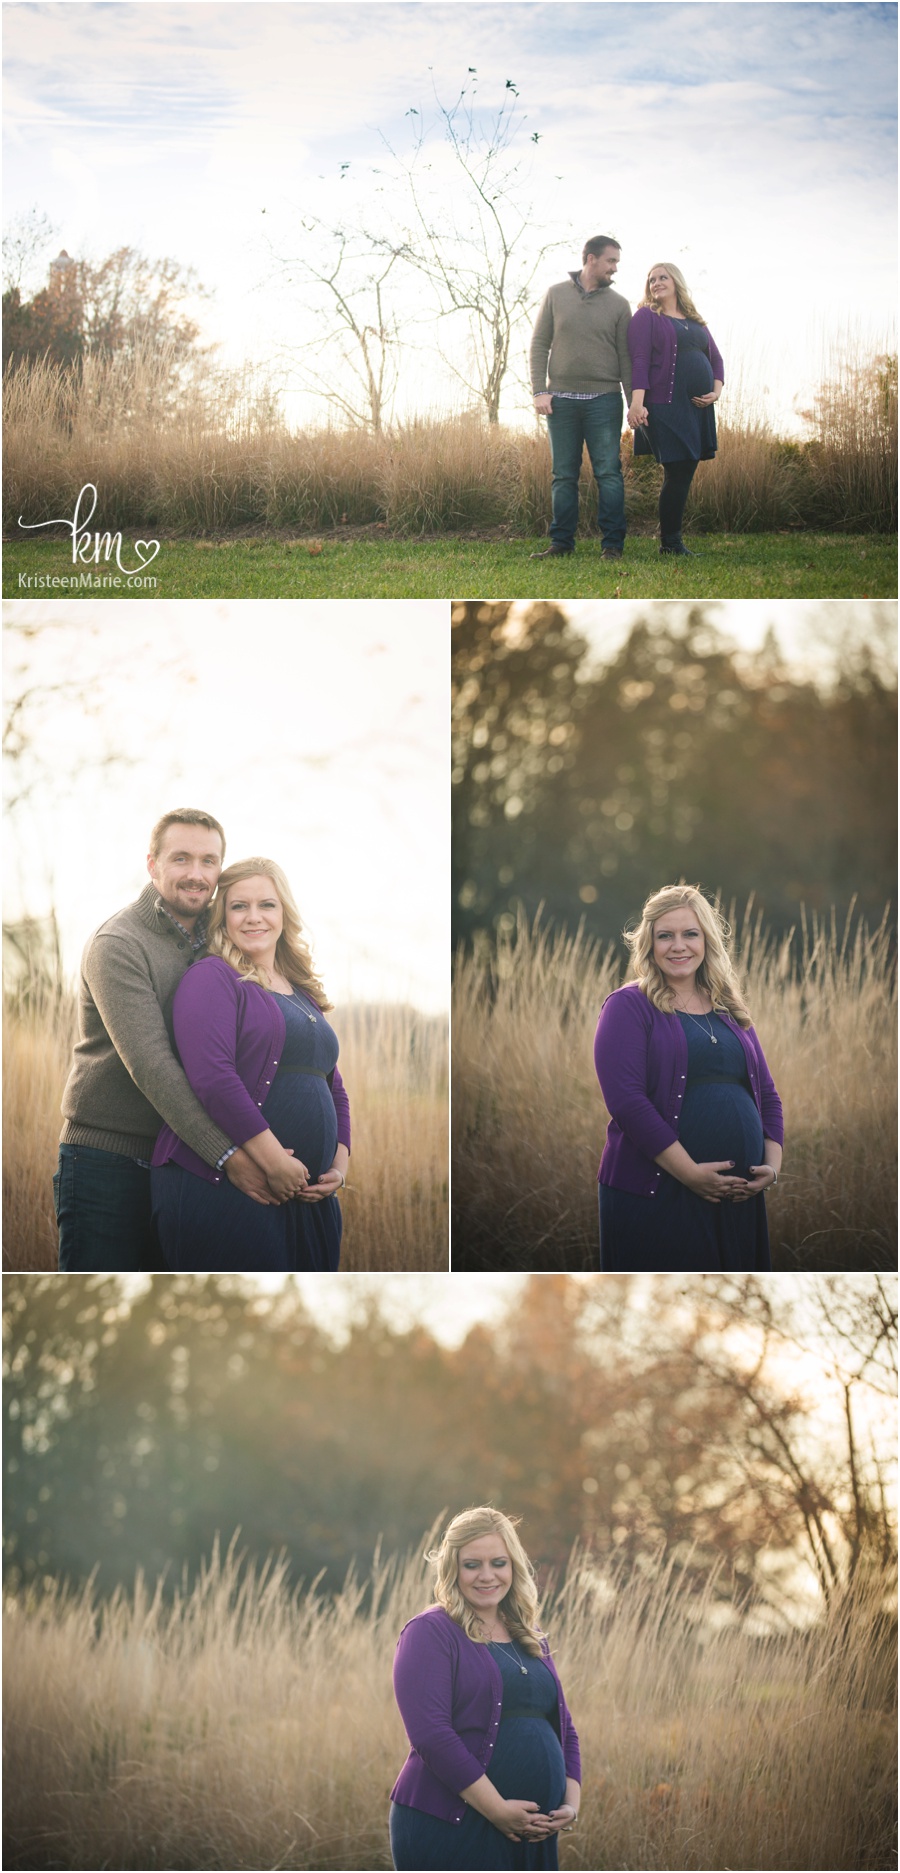 Fall maternity session in Carmel, IN by KristeenMarie Photography